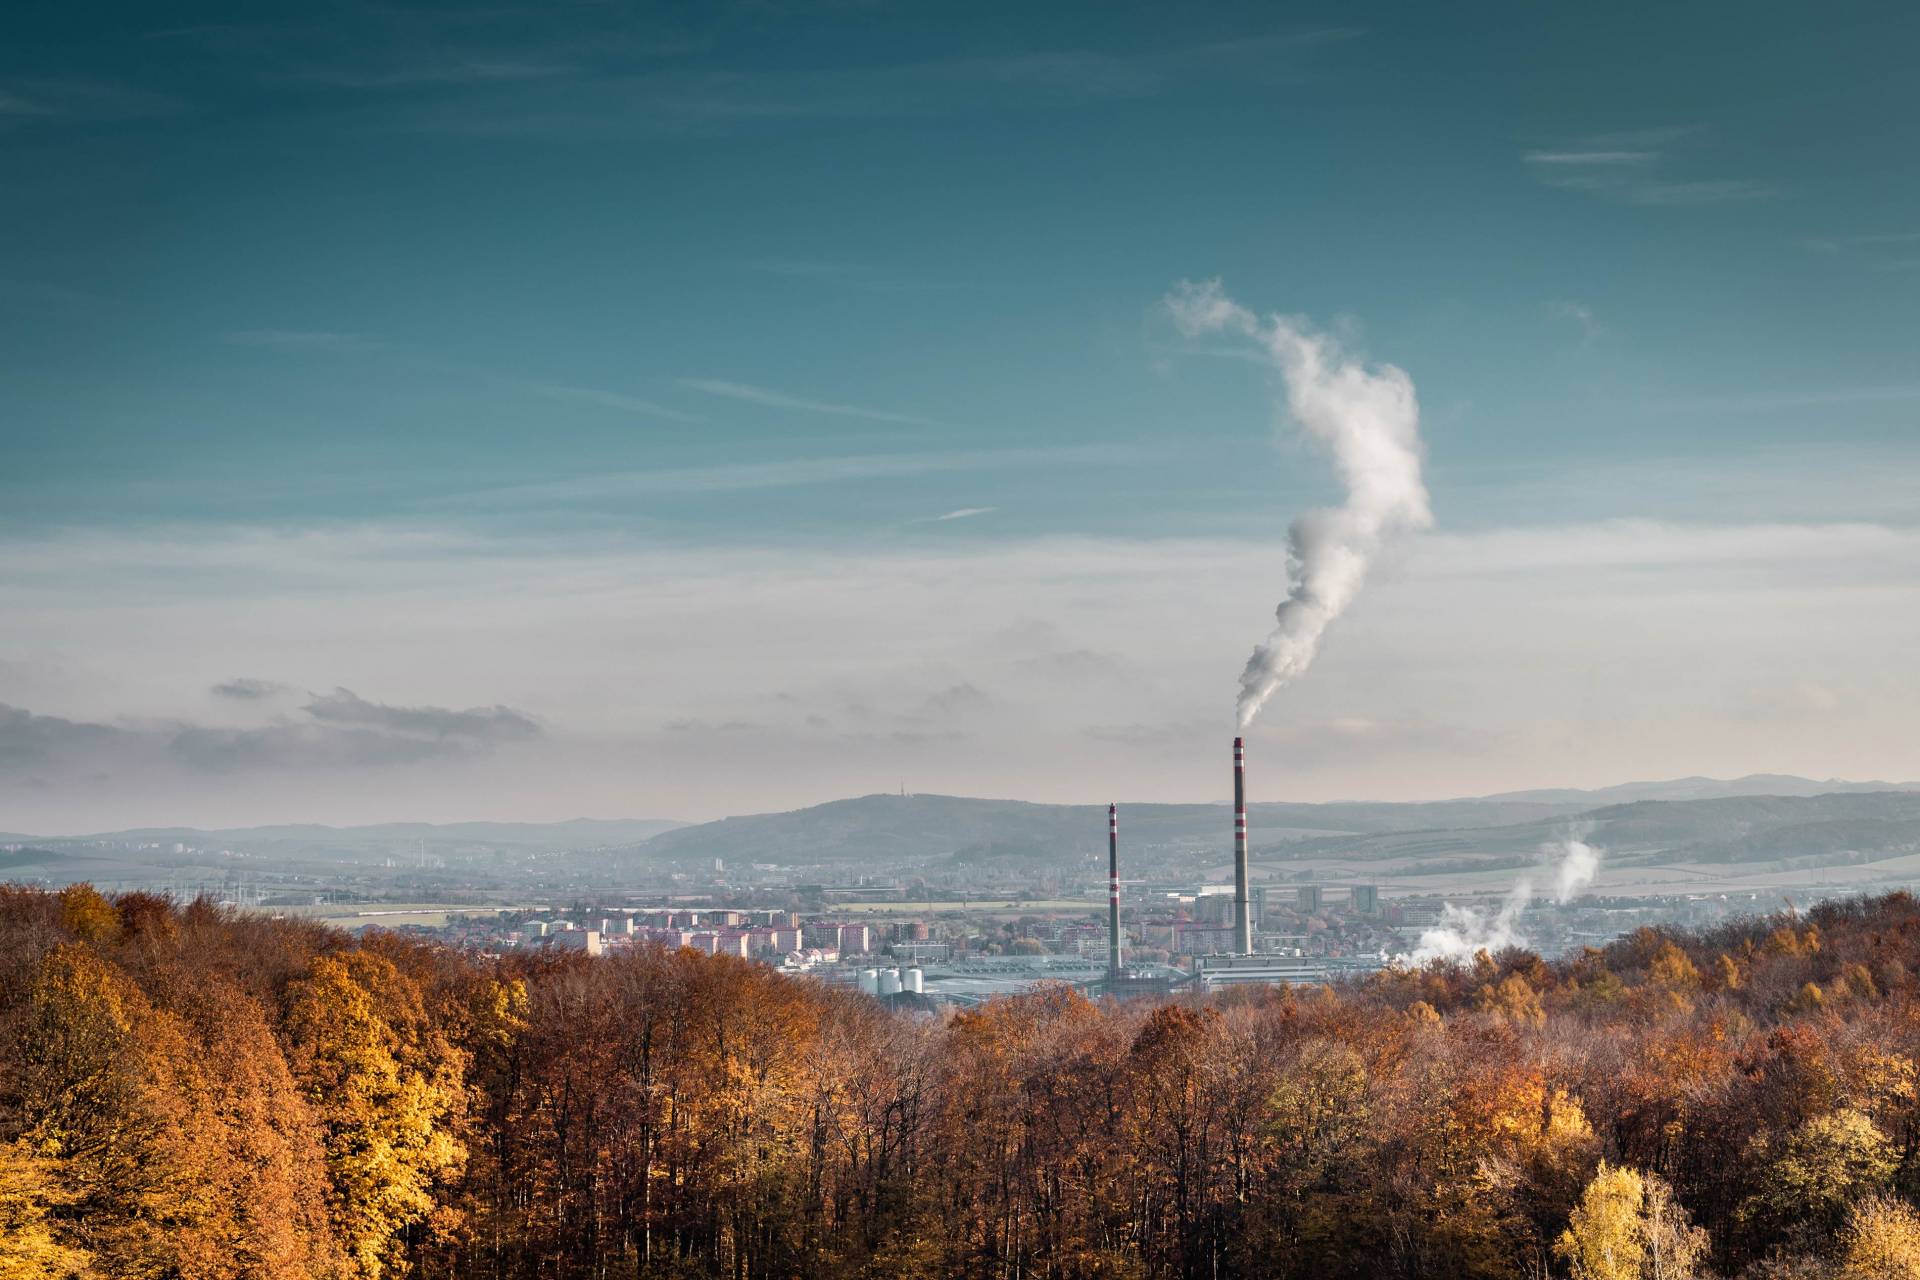 landscape of autumn trees and smokestacks in the background